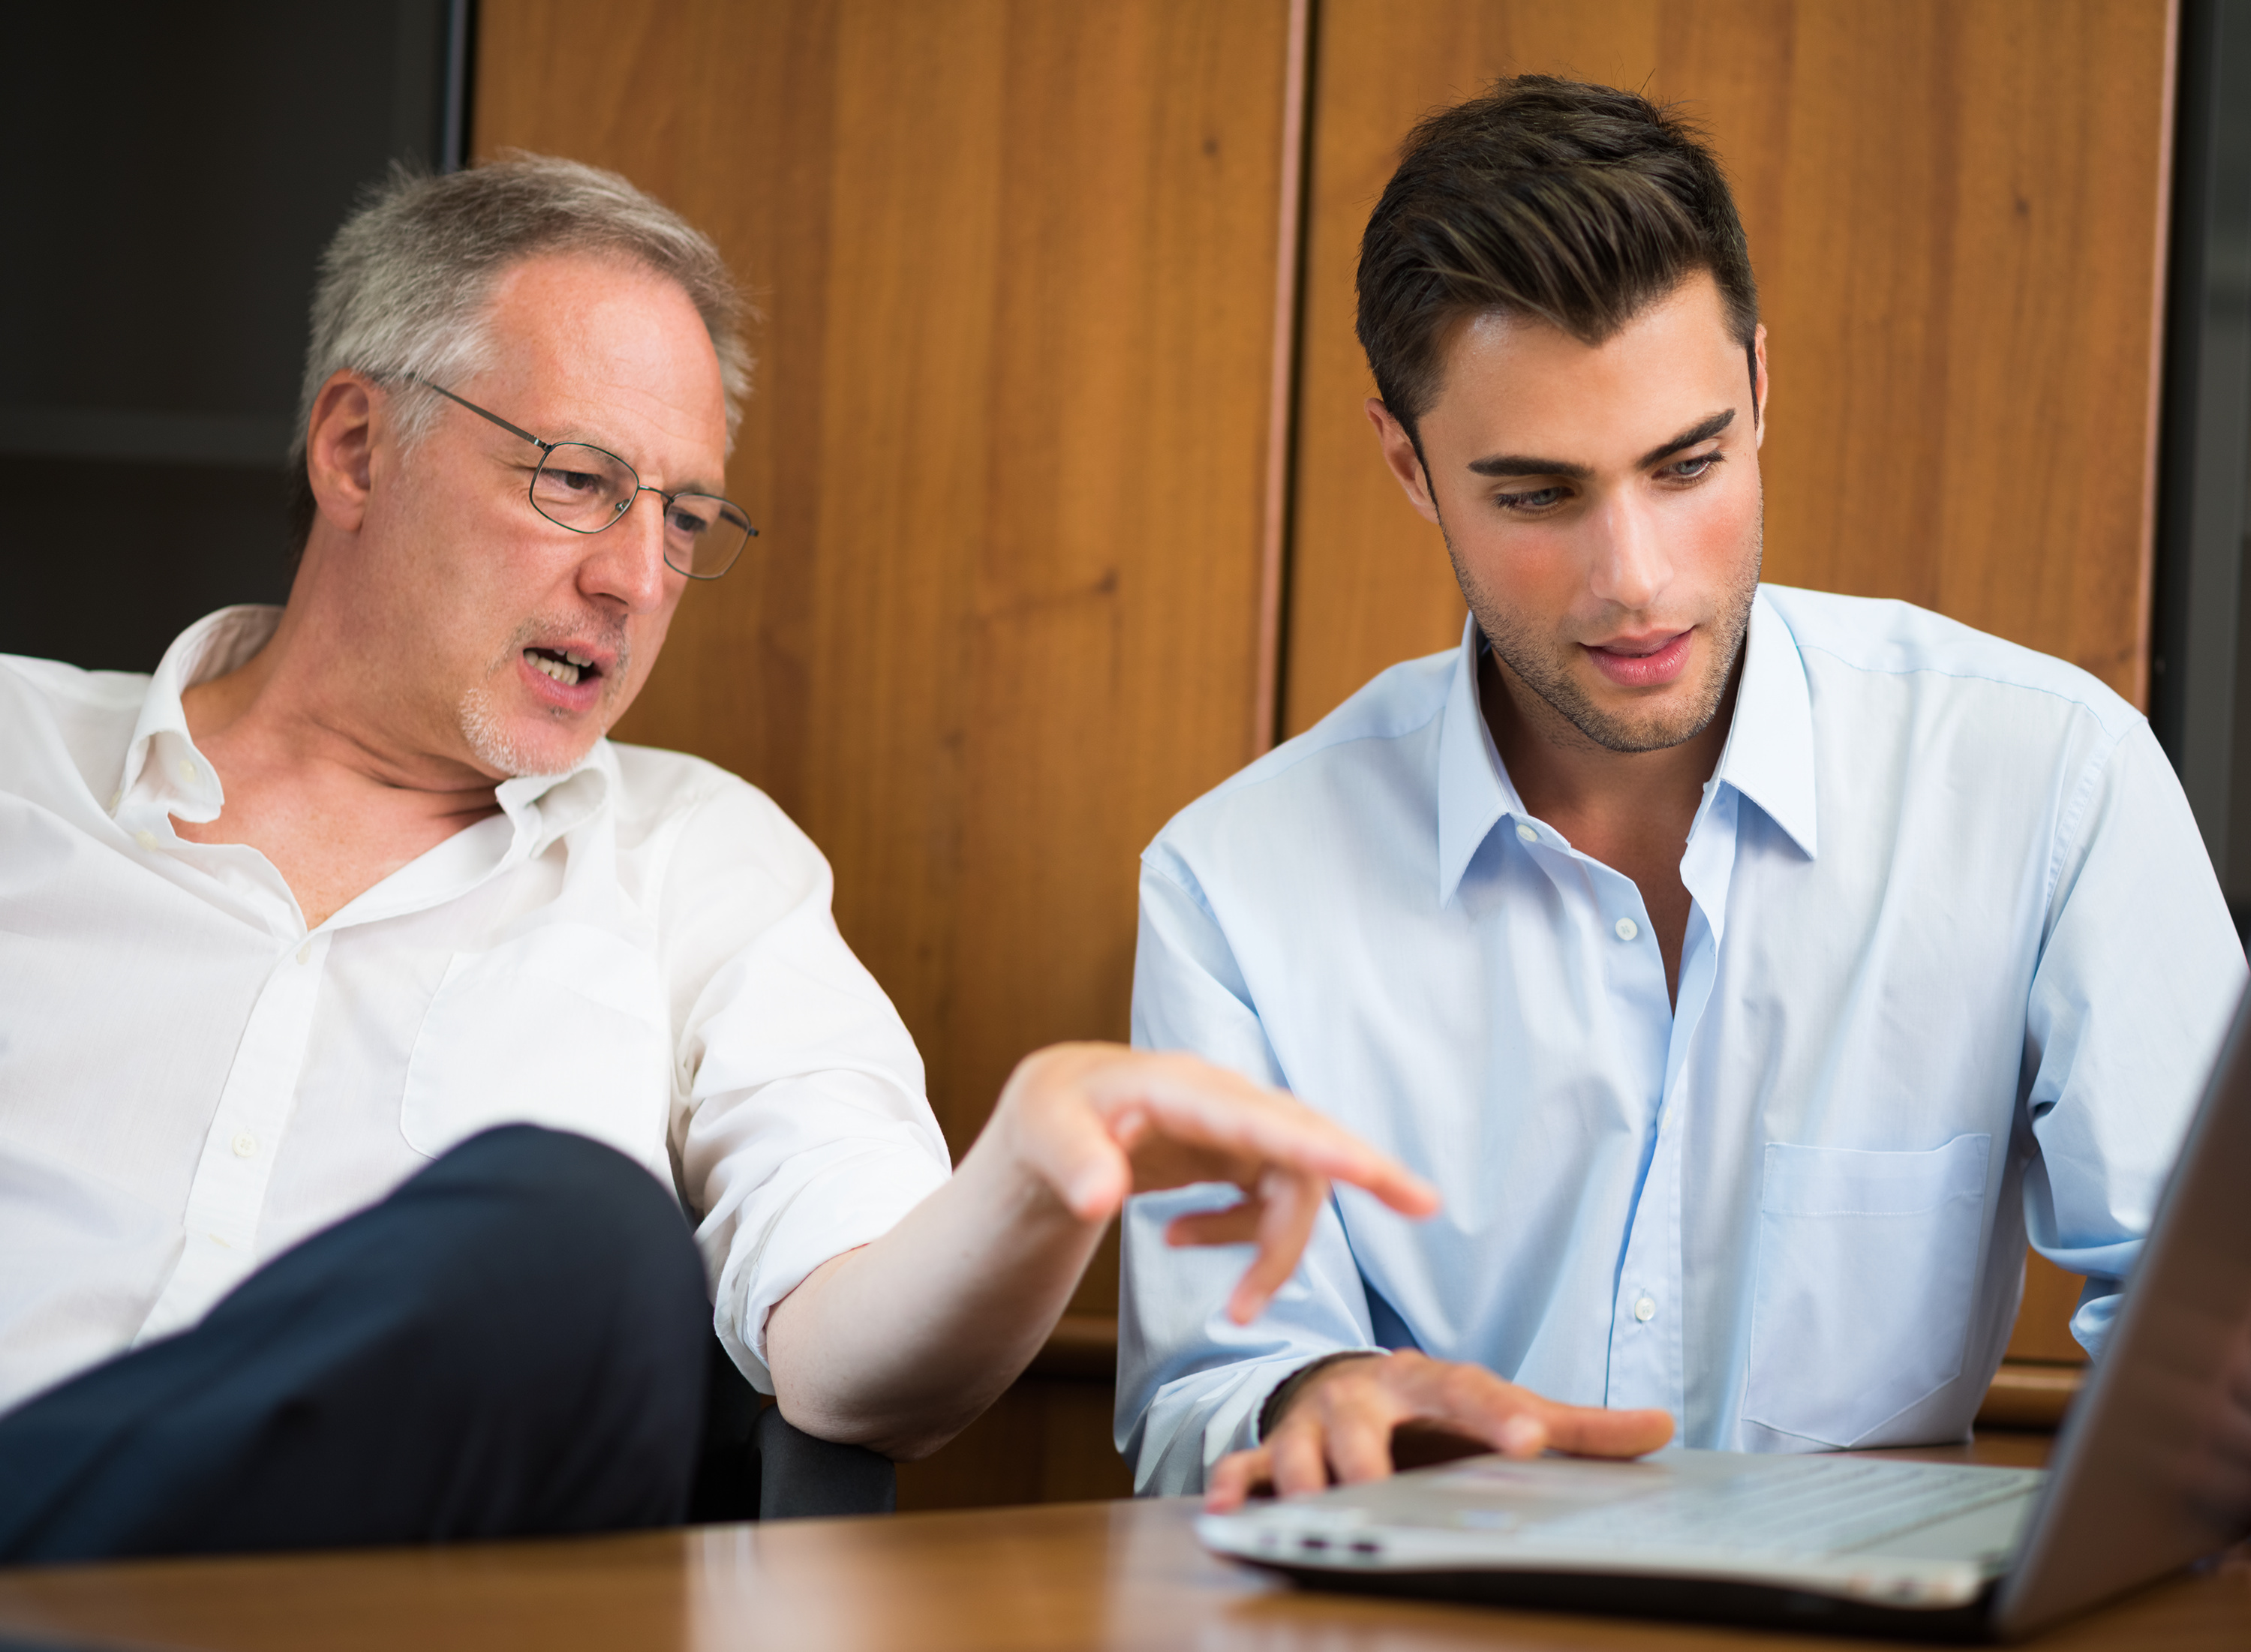 Son talks to his father at the office. | Source: Shutterstock